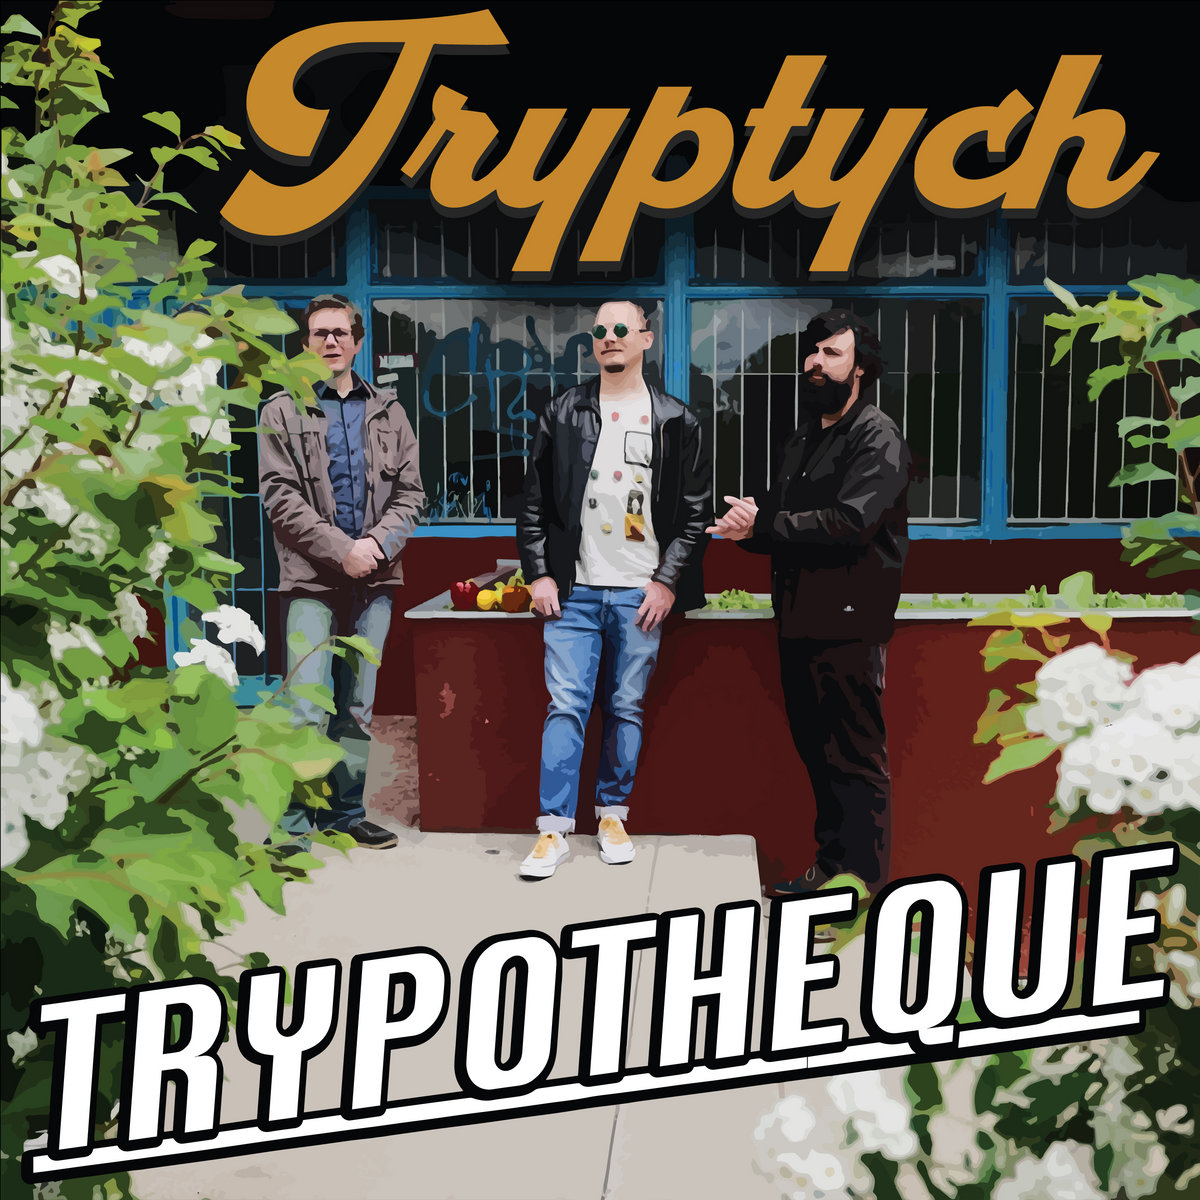 Tryptych - Trypotheque